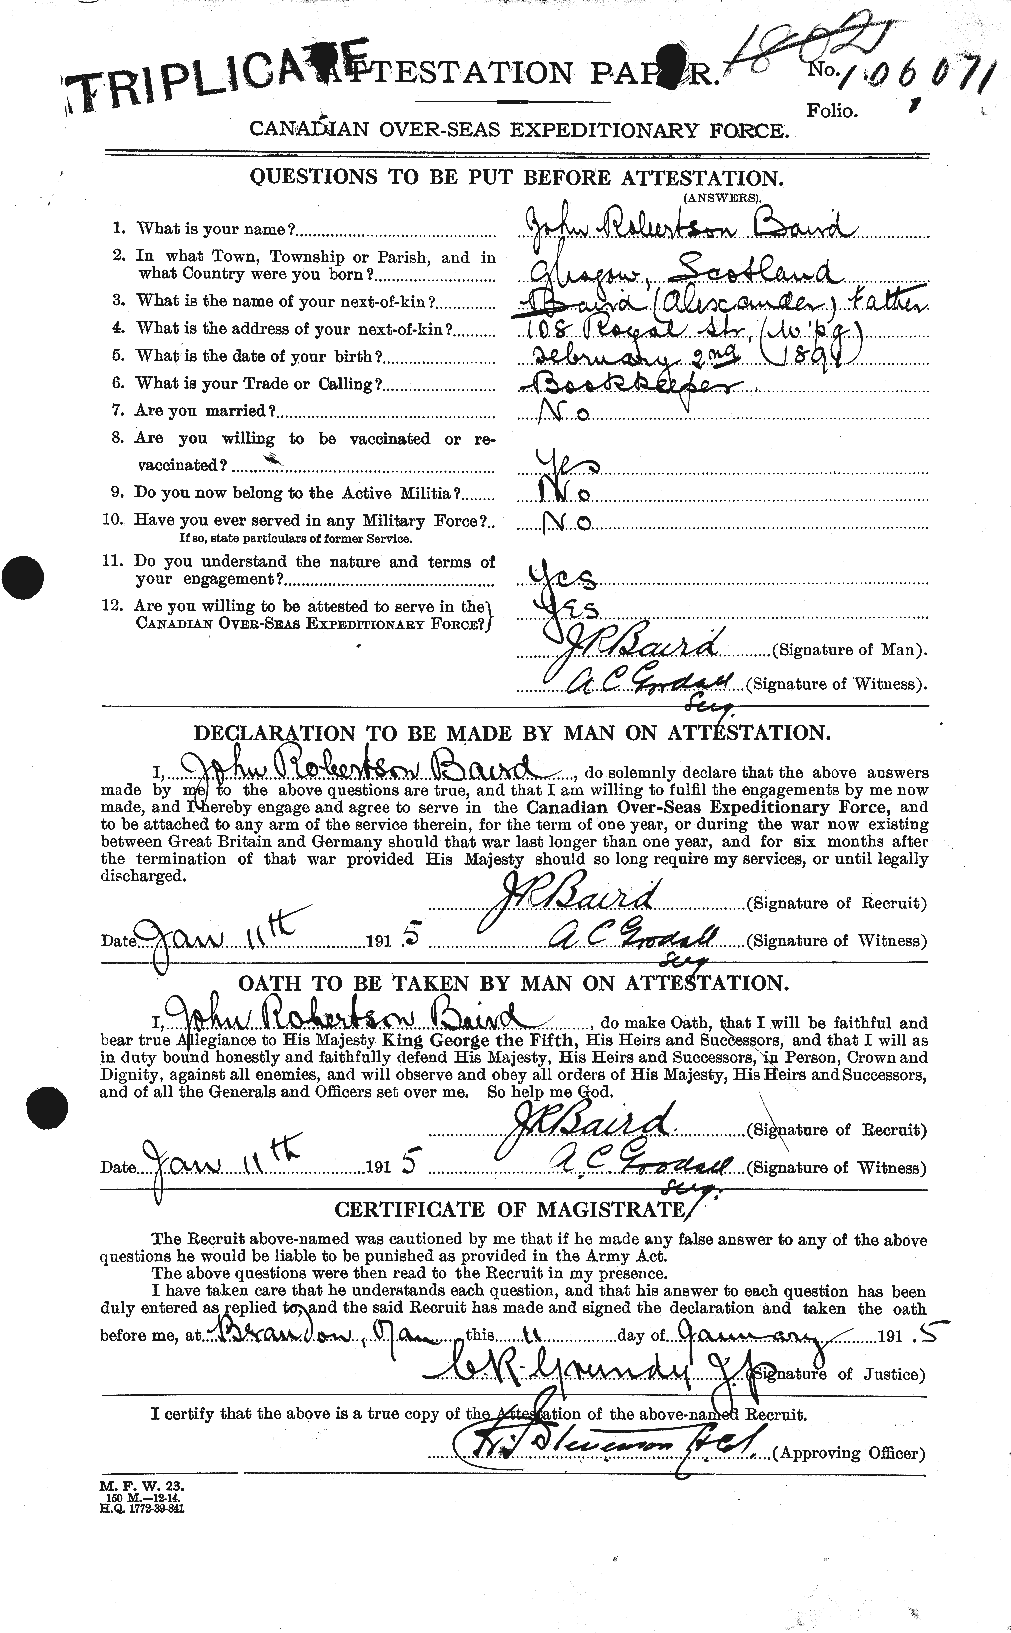 Personnel Records of the First World War - CEF 226609a